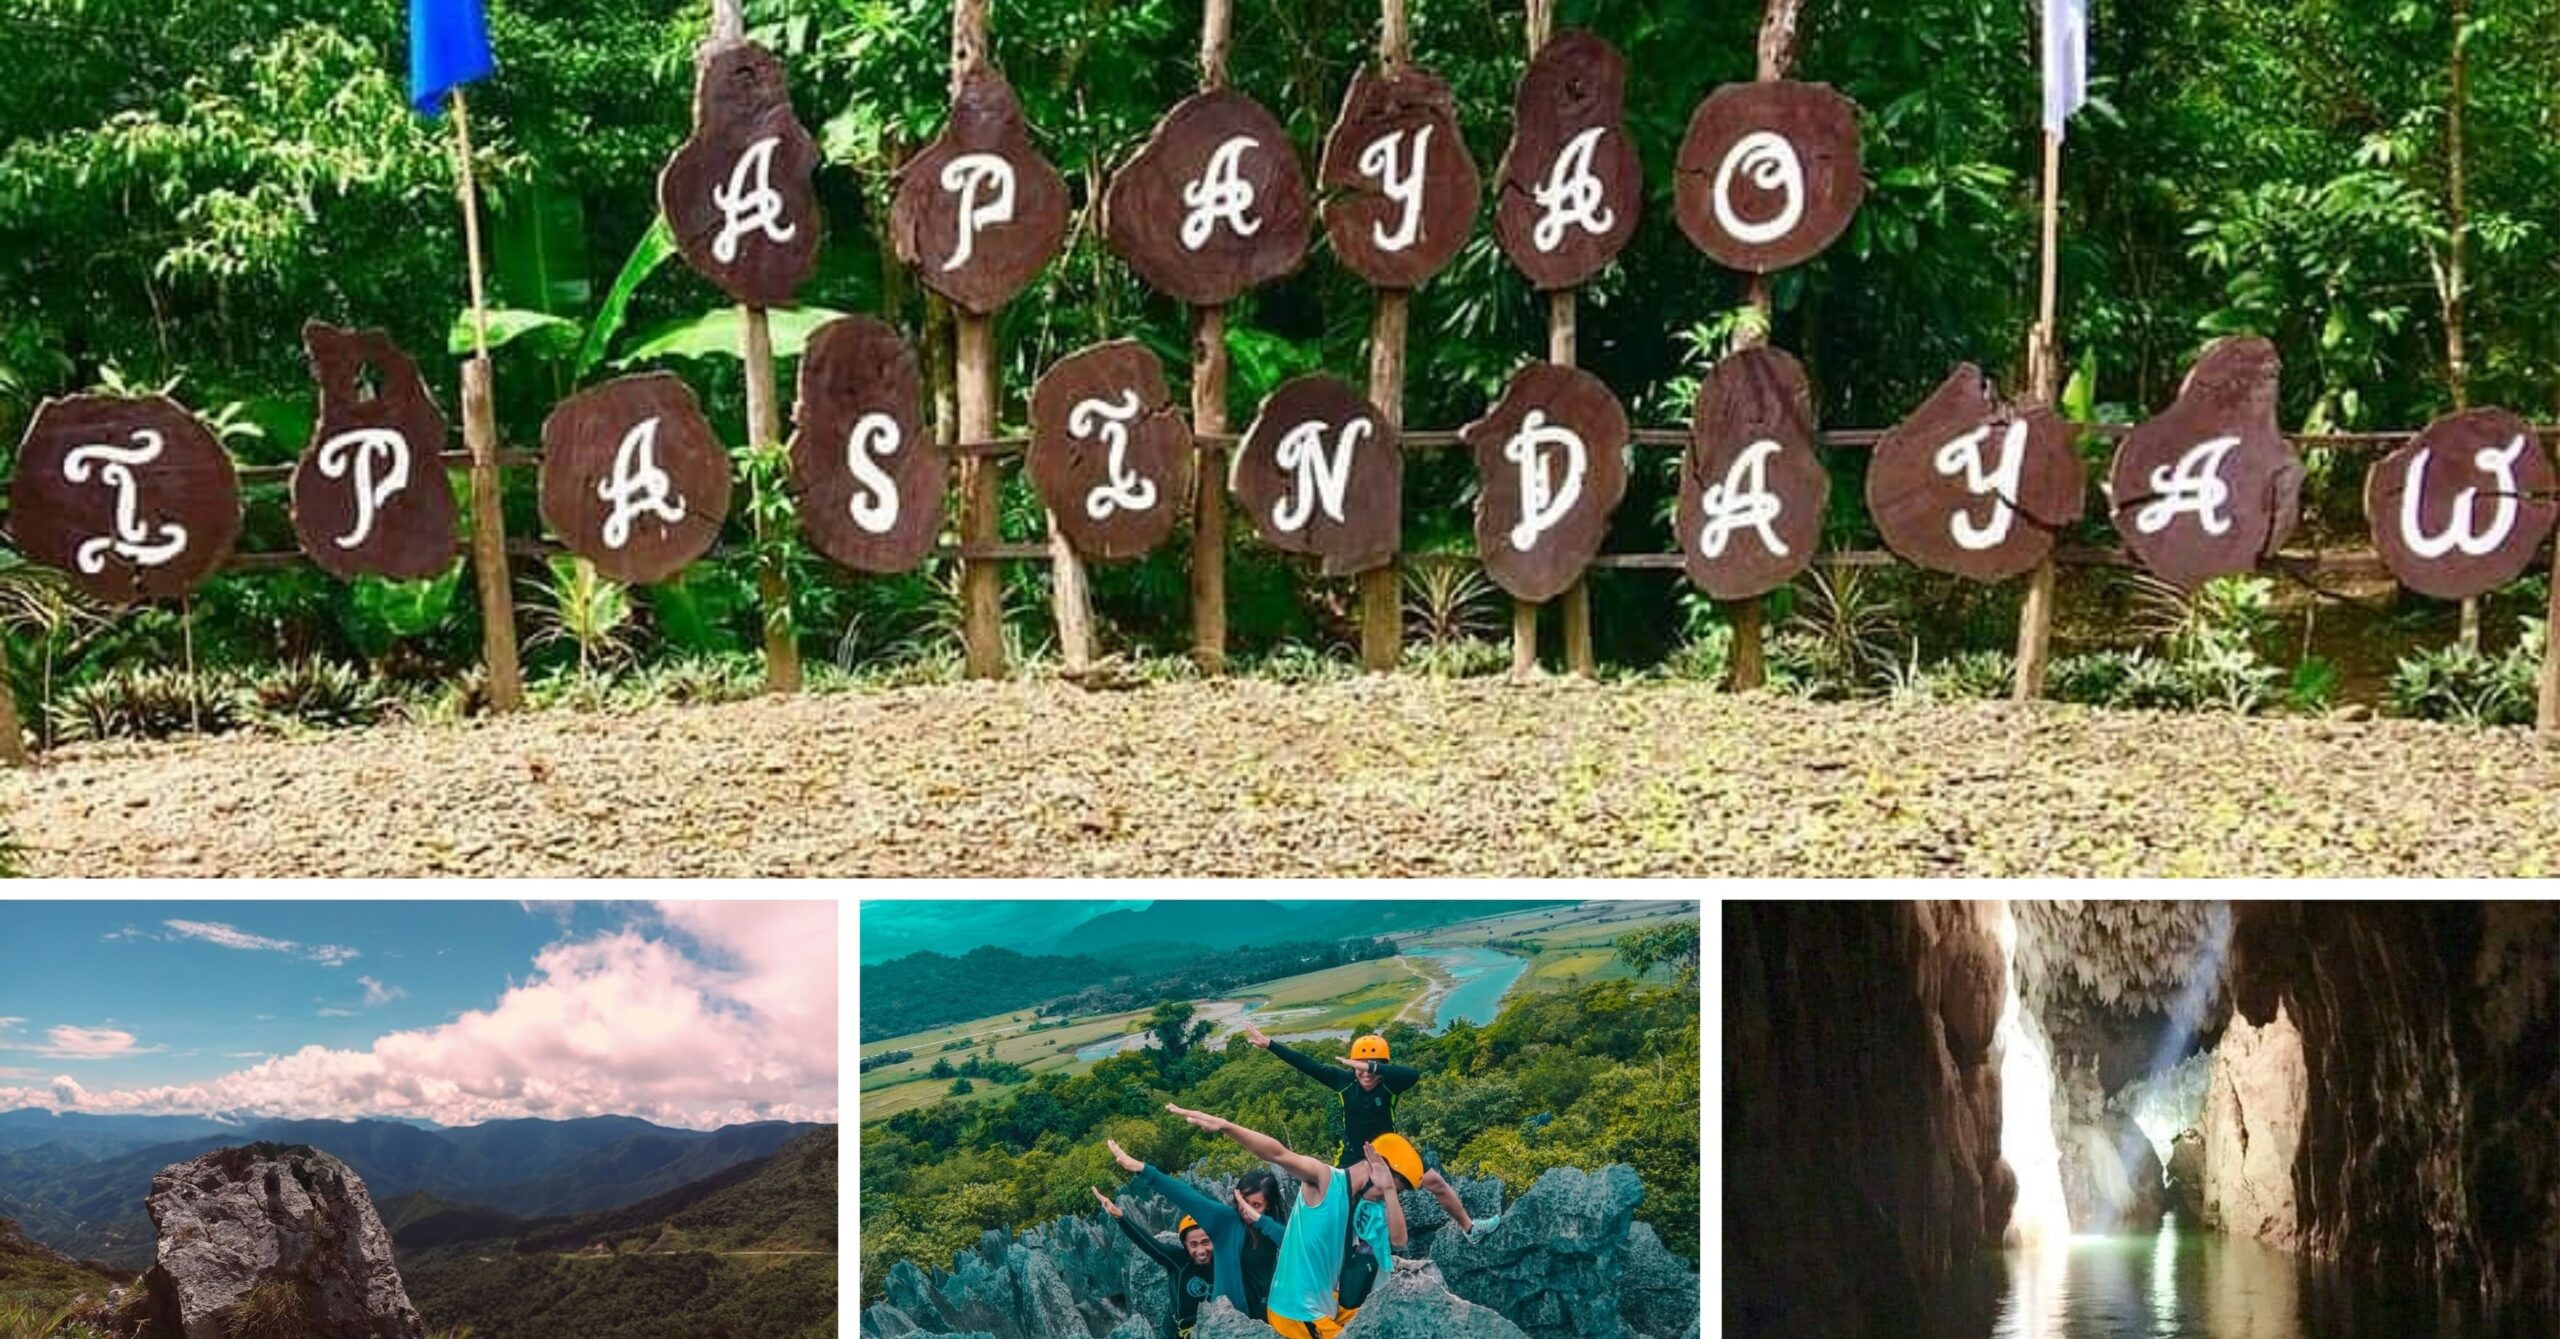 What to do in Apayao